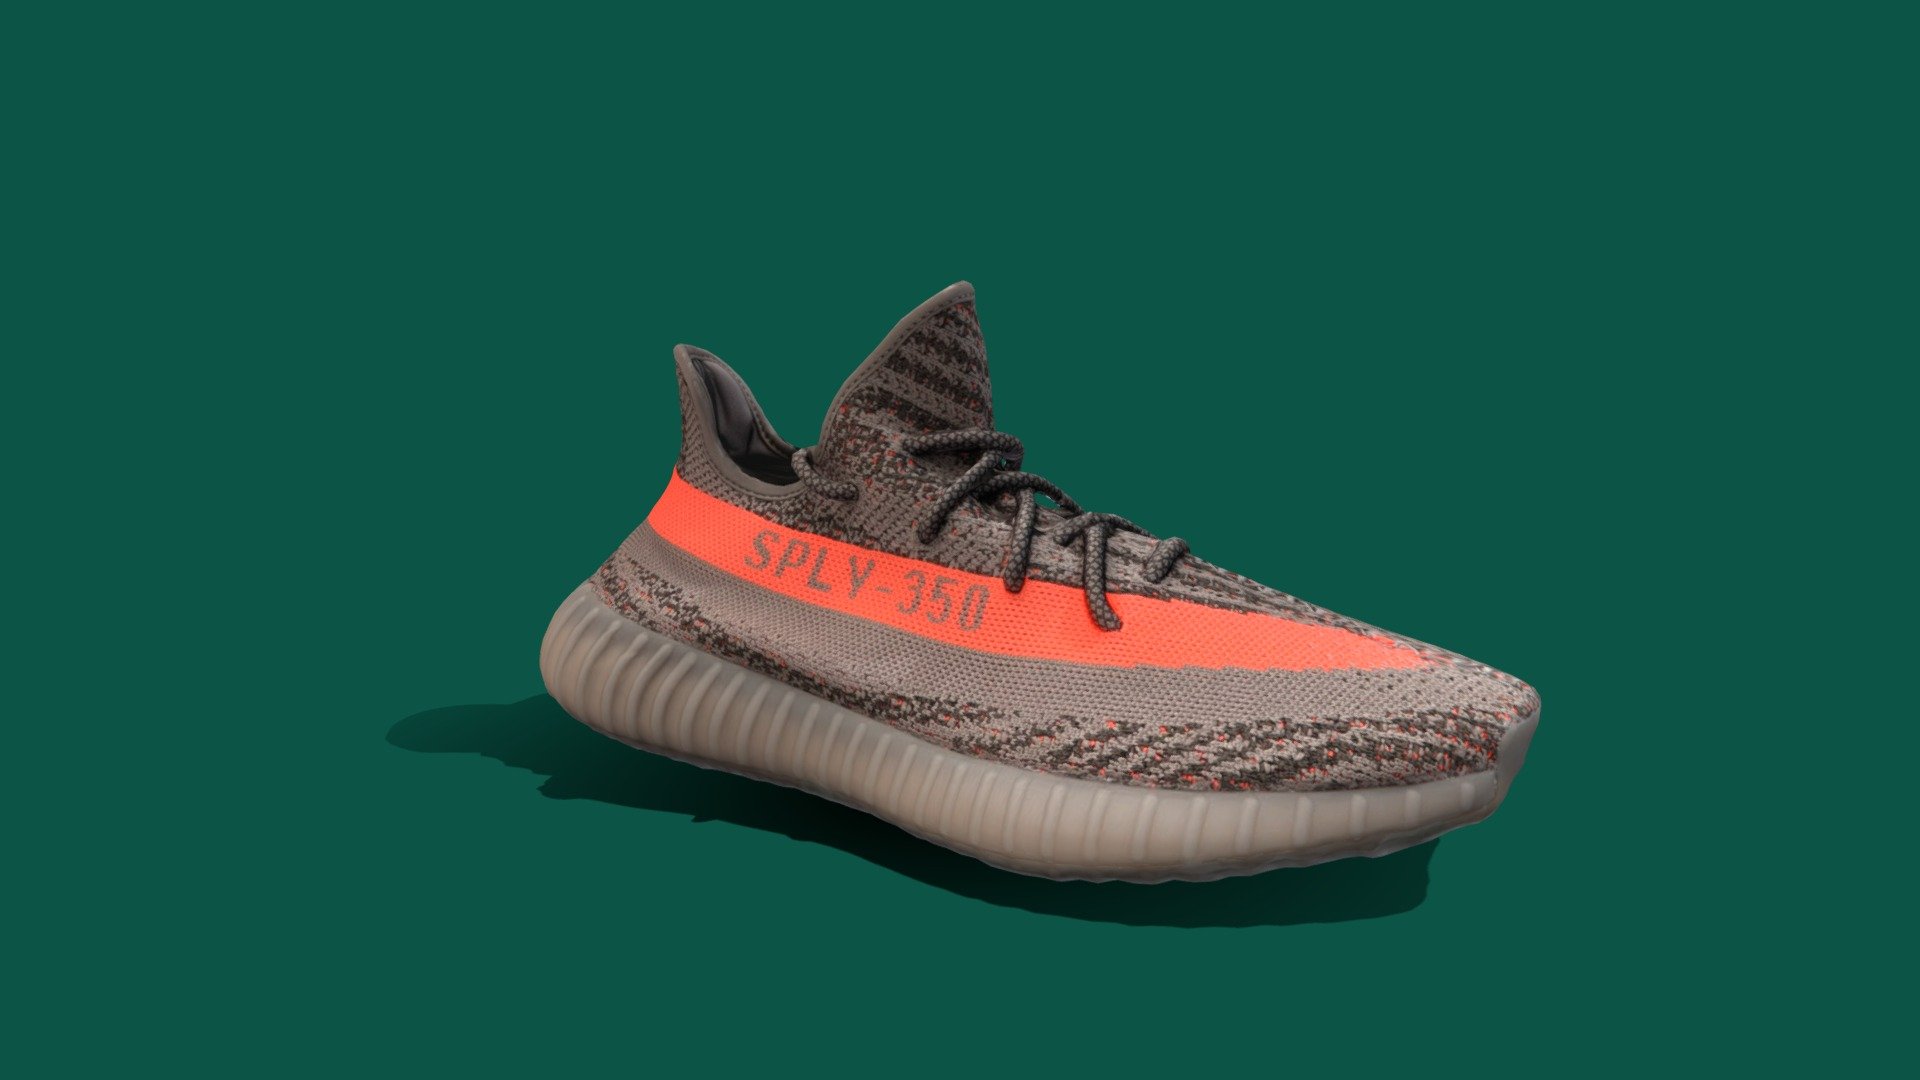 Adidas Yeezy Boost 350 V2 - 3D model by Nyilonelycompany [7e6310f ...